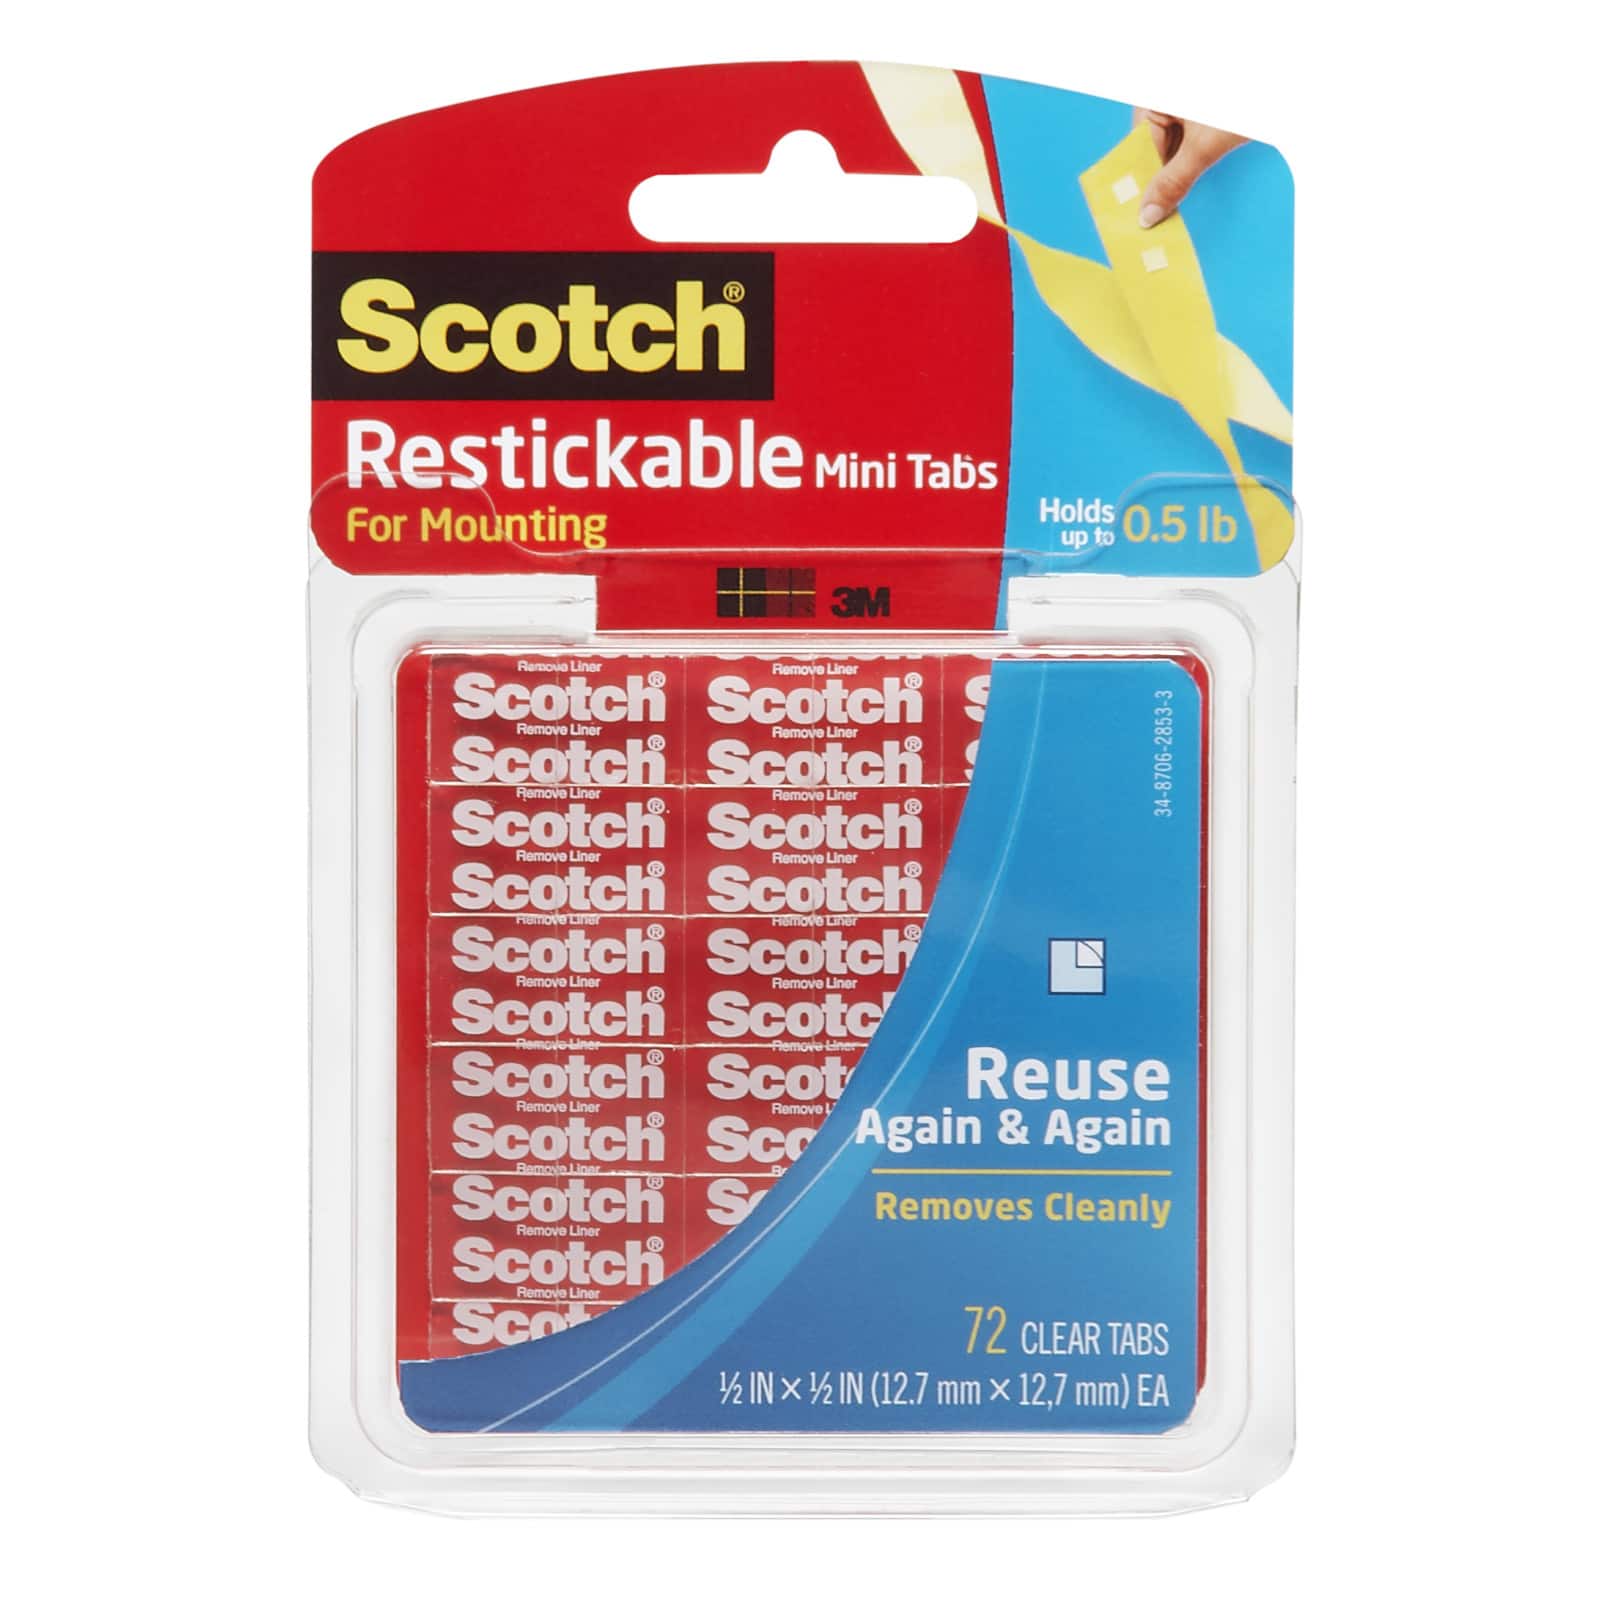 24 Packs: 72 ct. (1,728 total) 3M Scotch&#xAE; Restickable Mini Mounting Tabs